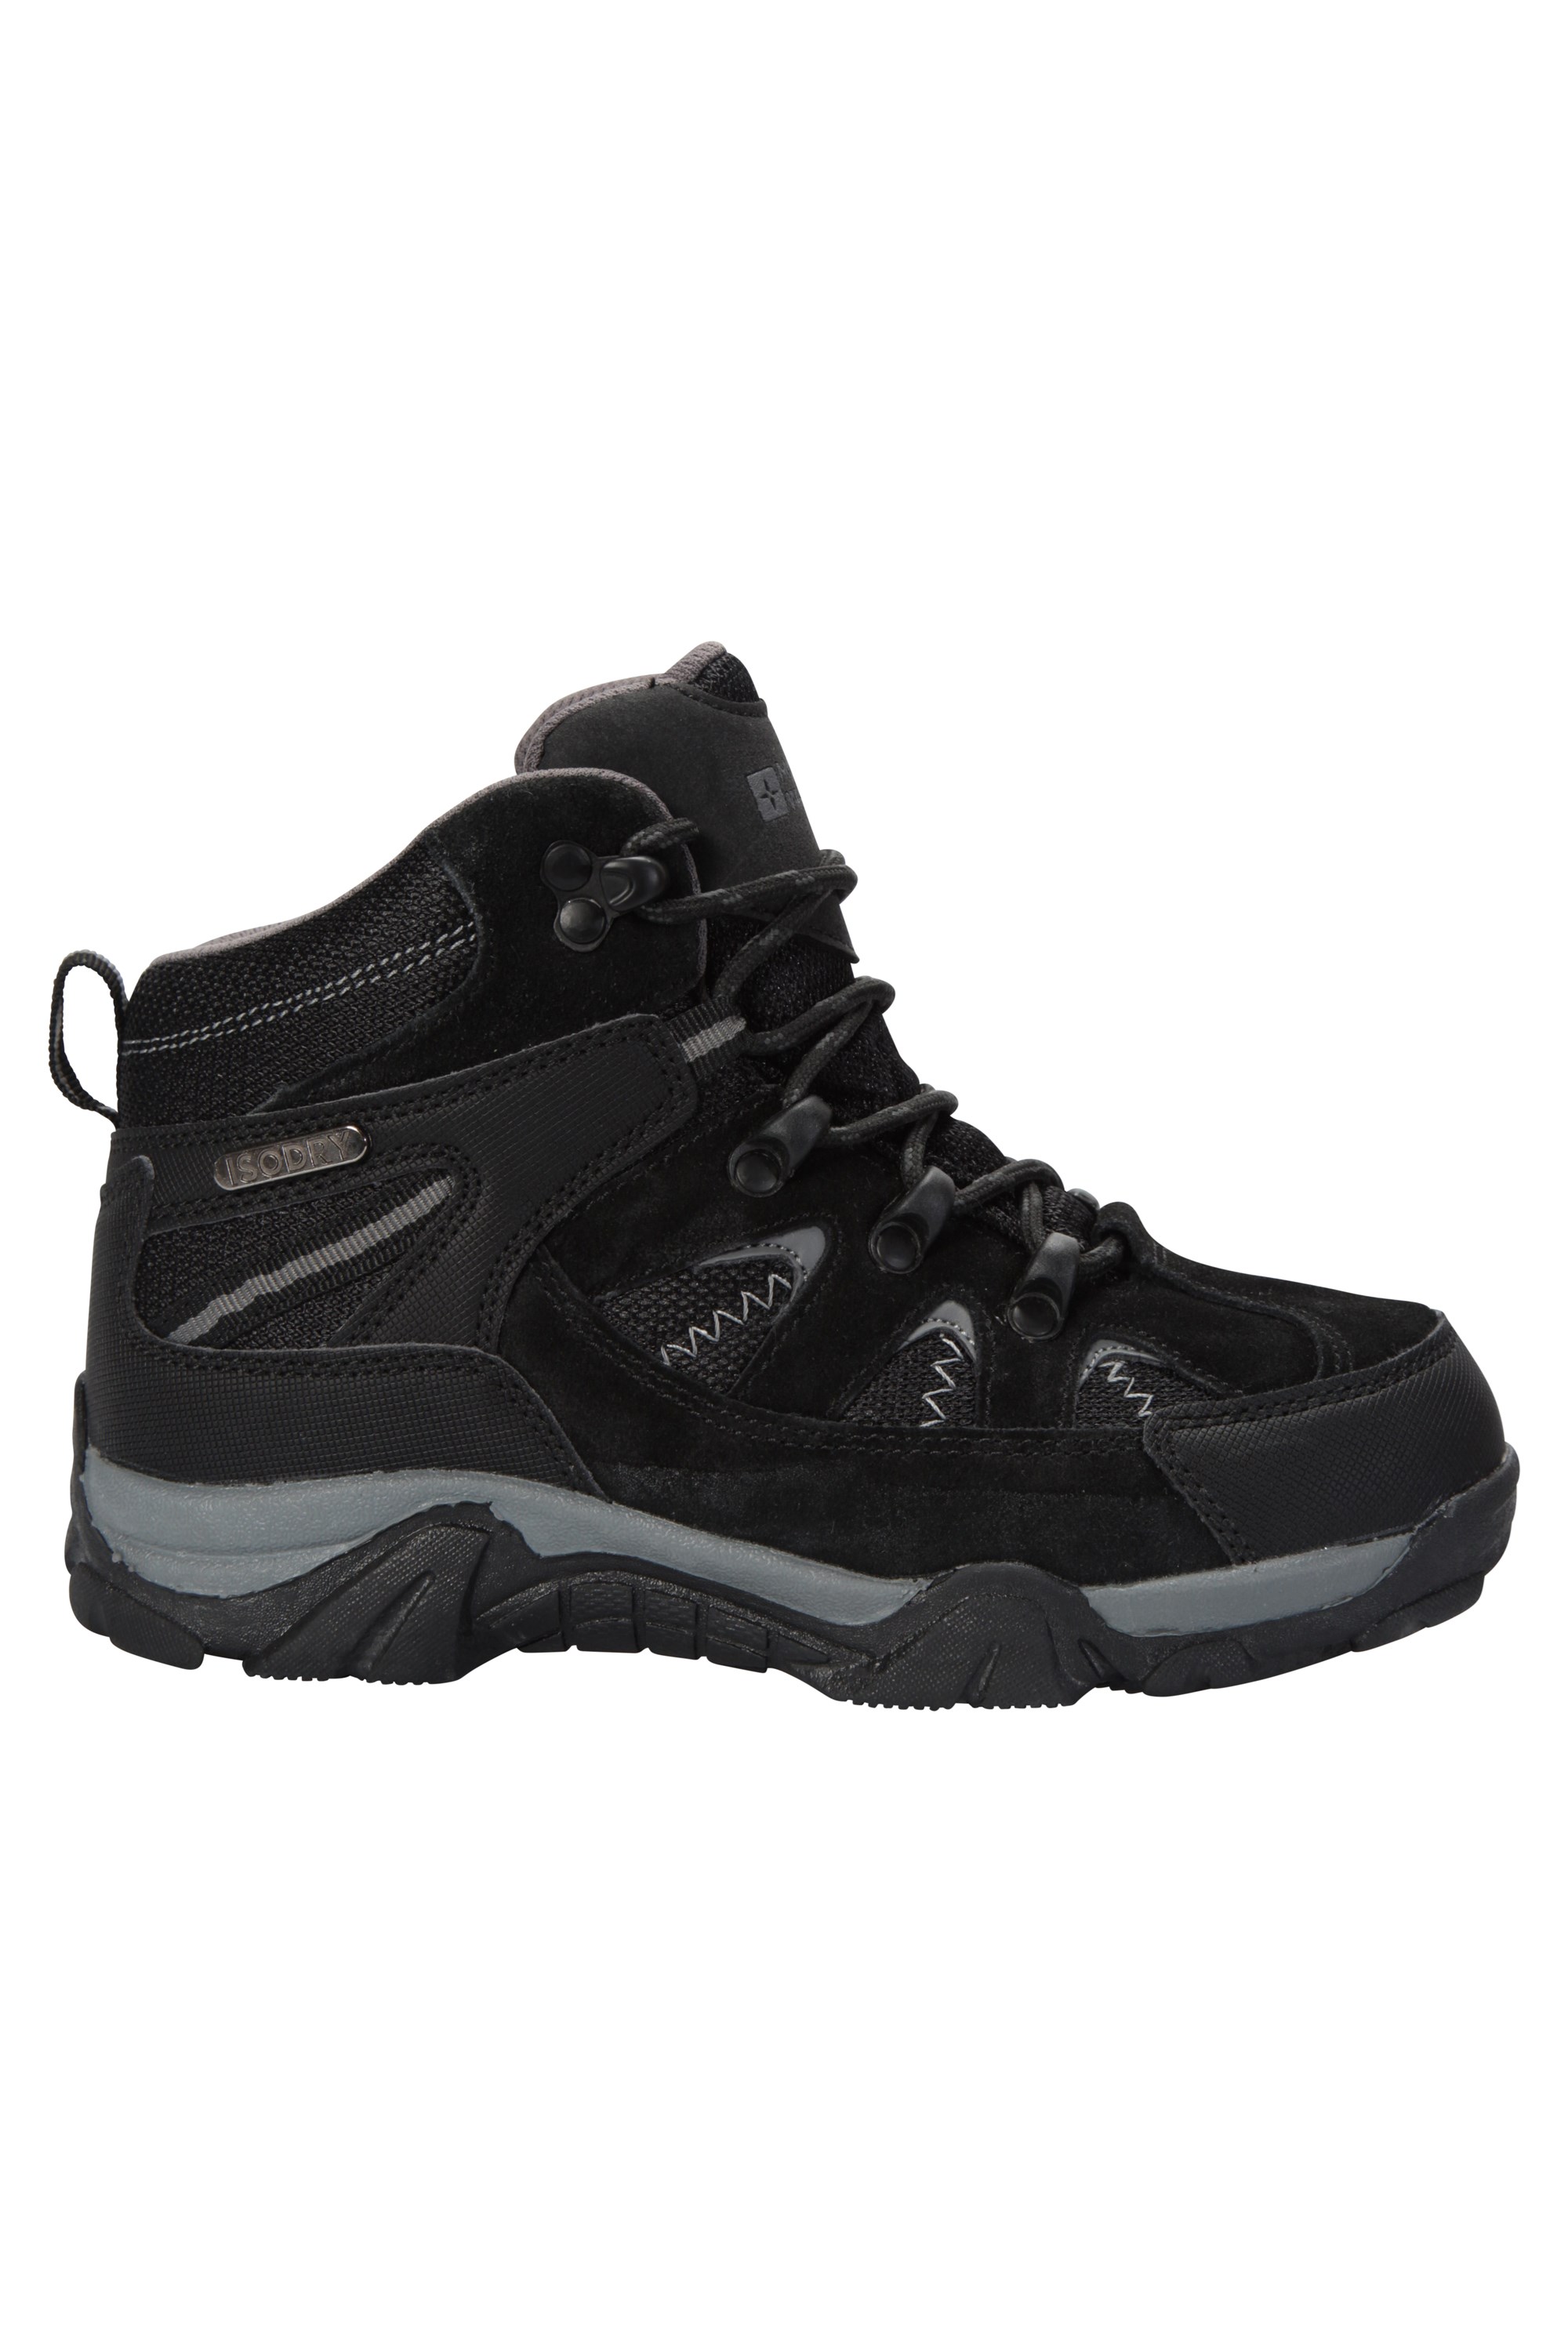 mountain warehouse childrens walking boots